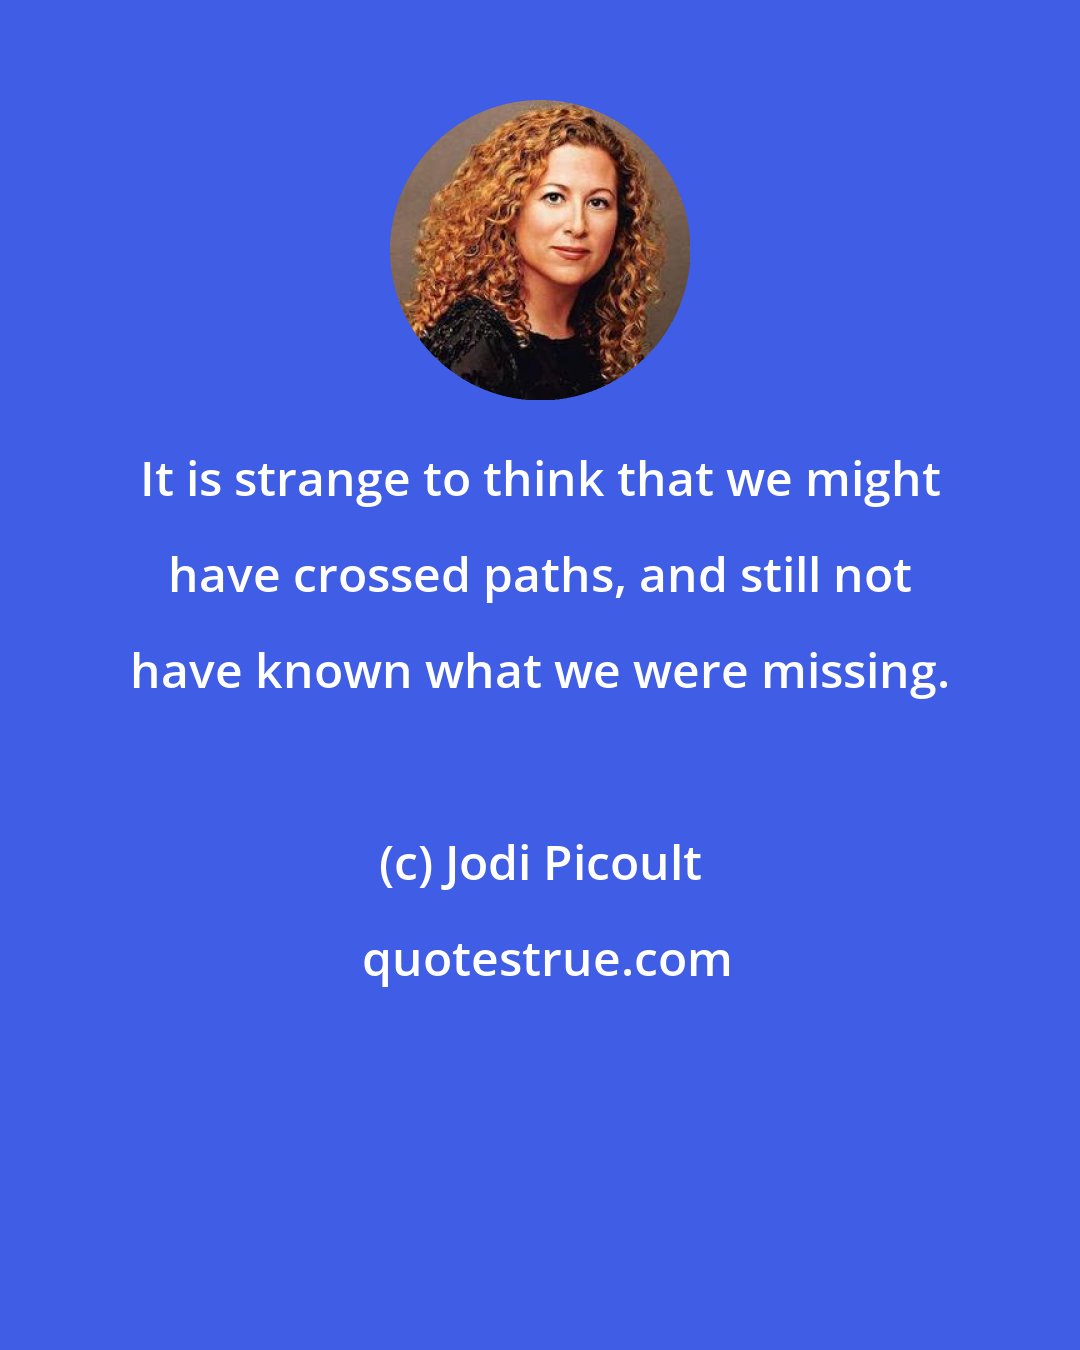 Jodi Picoult: It is strange to think that we might have crossed paths, and still not have known what we were missing.